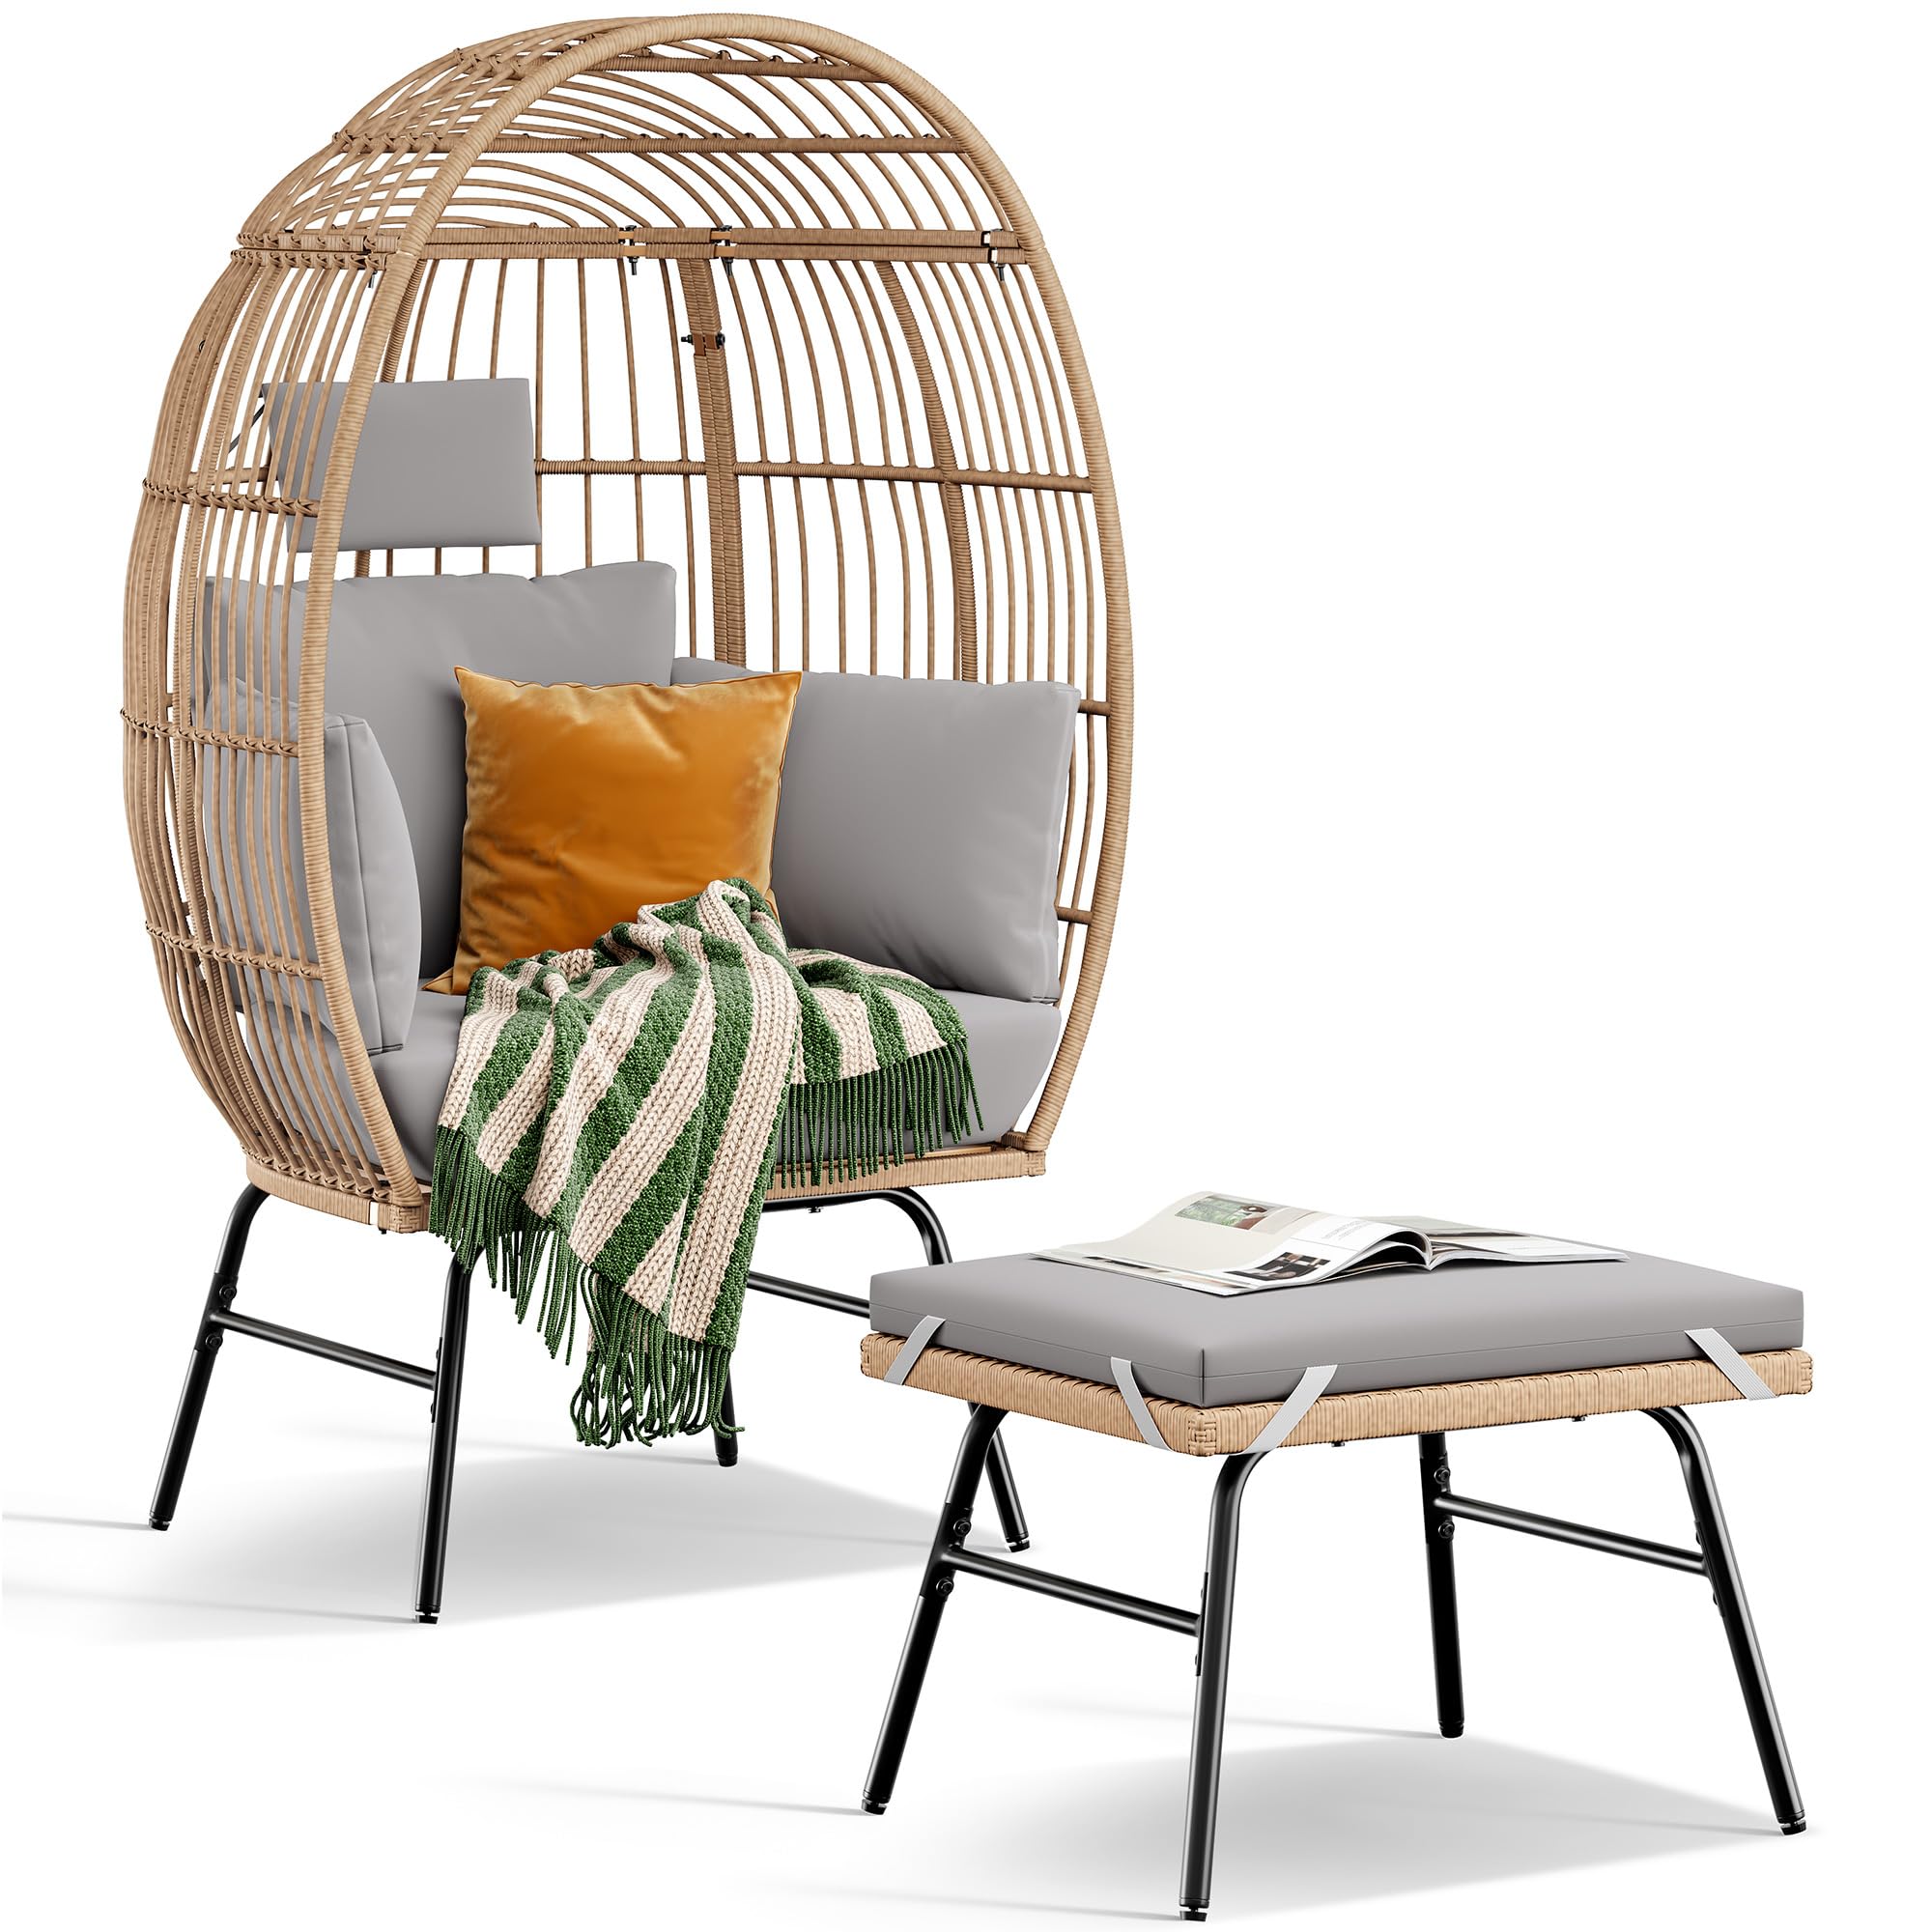 YITAHOME Outdoor Egg Chair with Footrest, Patio Wicker Basket Chair with 2-in-1 Ottoman, Indoor Egg Chairs with Stand & Cushion Cocoon Chair  $164.99